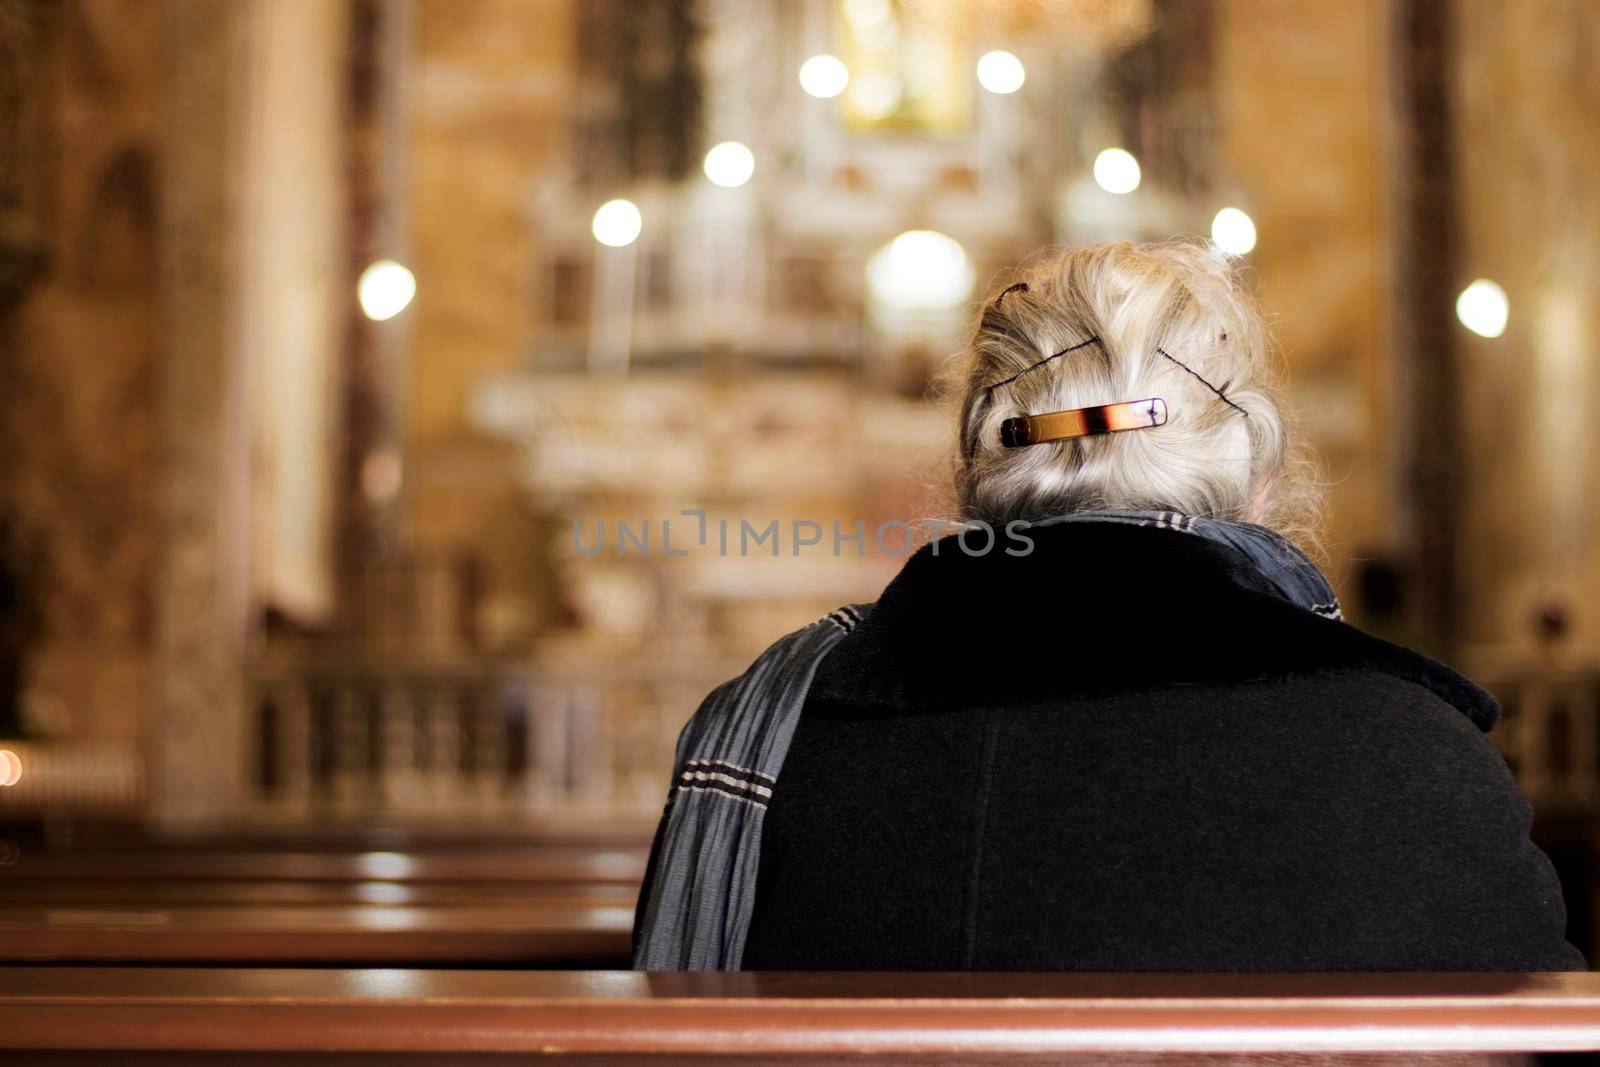 Old woman praying in the church and bokeh effect with the candles in the background